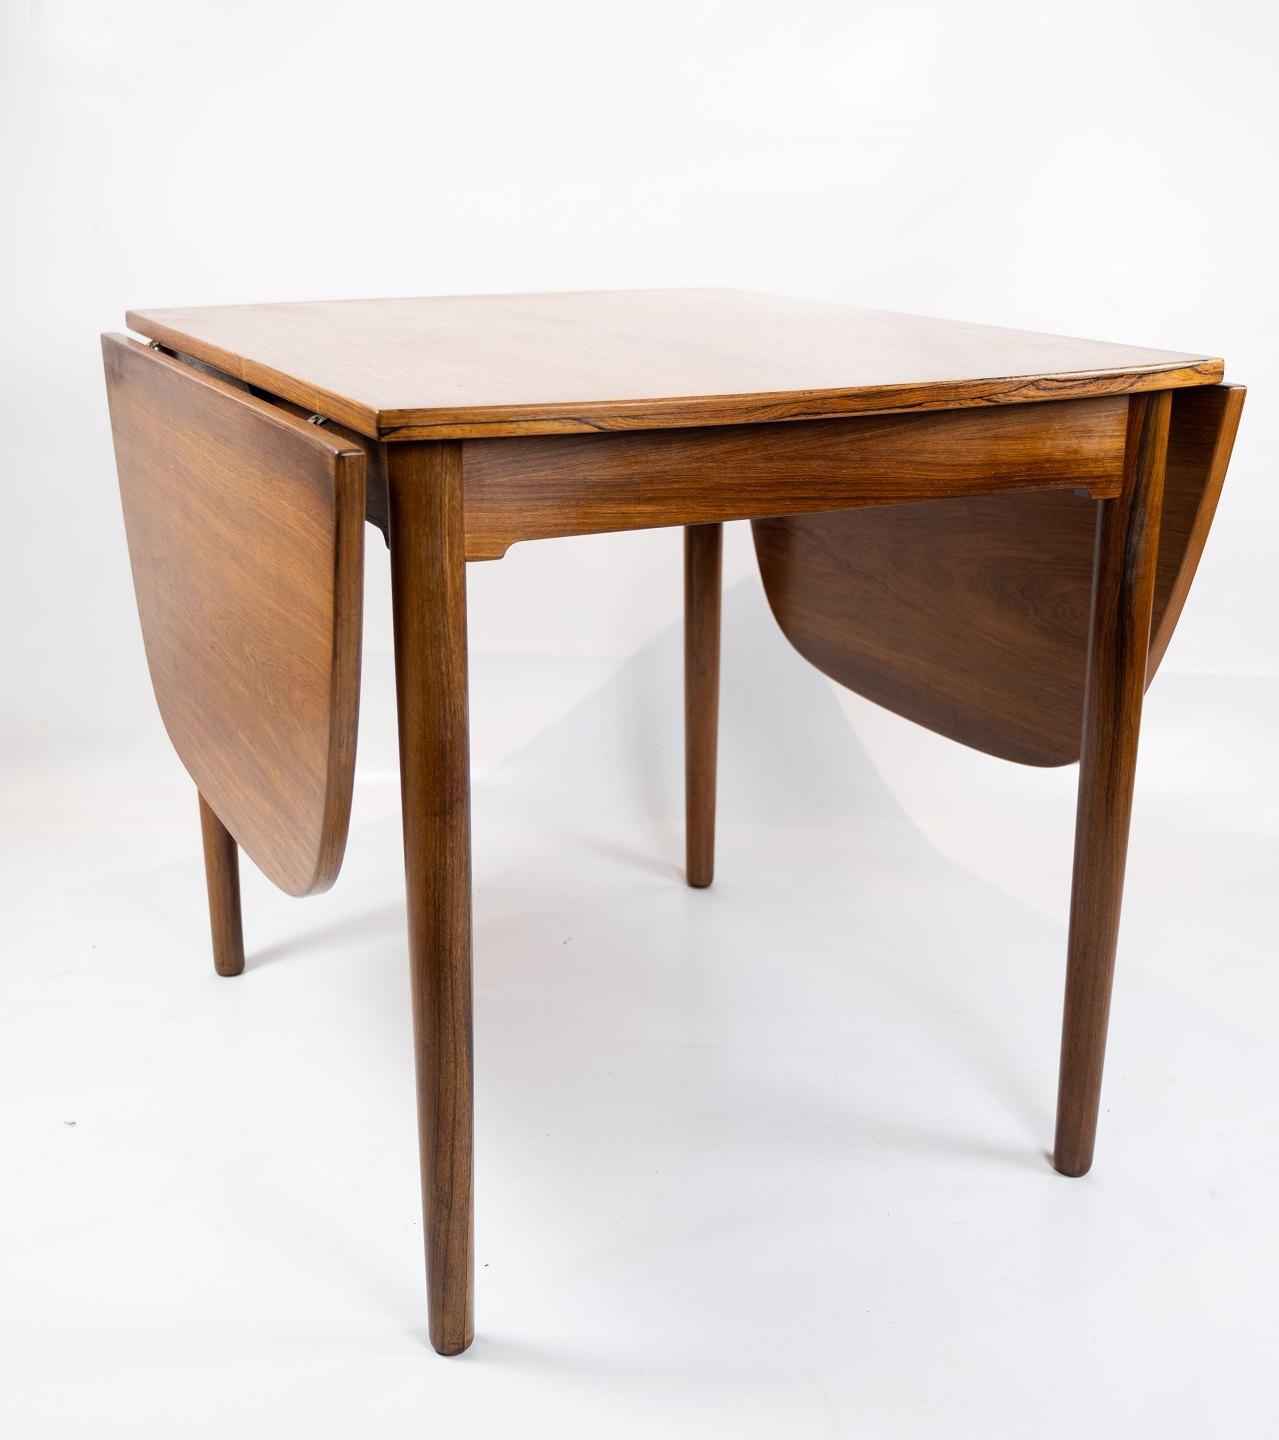 Scandinavian Modern Smaller Dining Table in Rosewood with Extentions of Danish Design from the 1960s For Sale